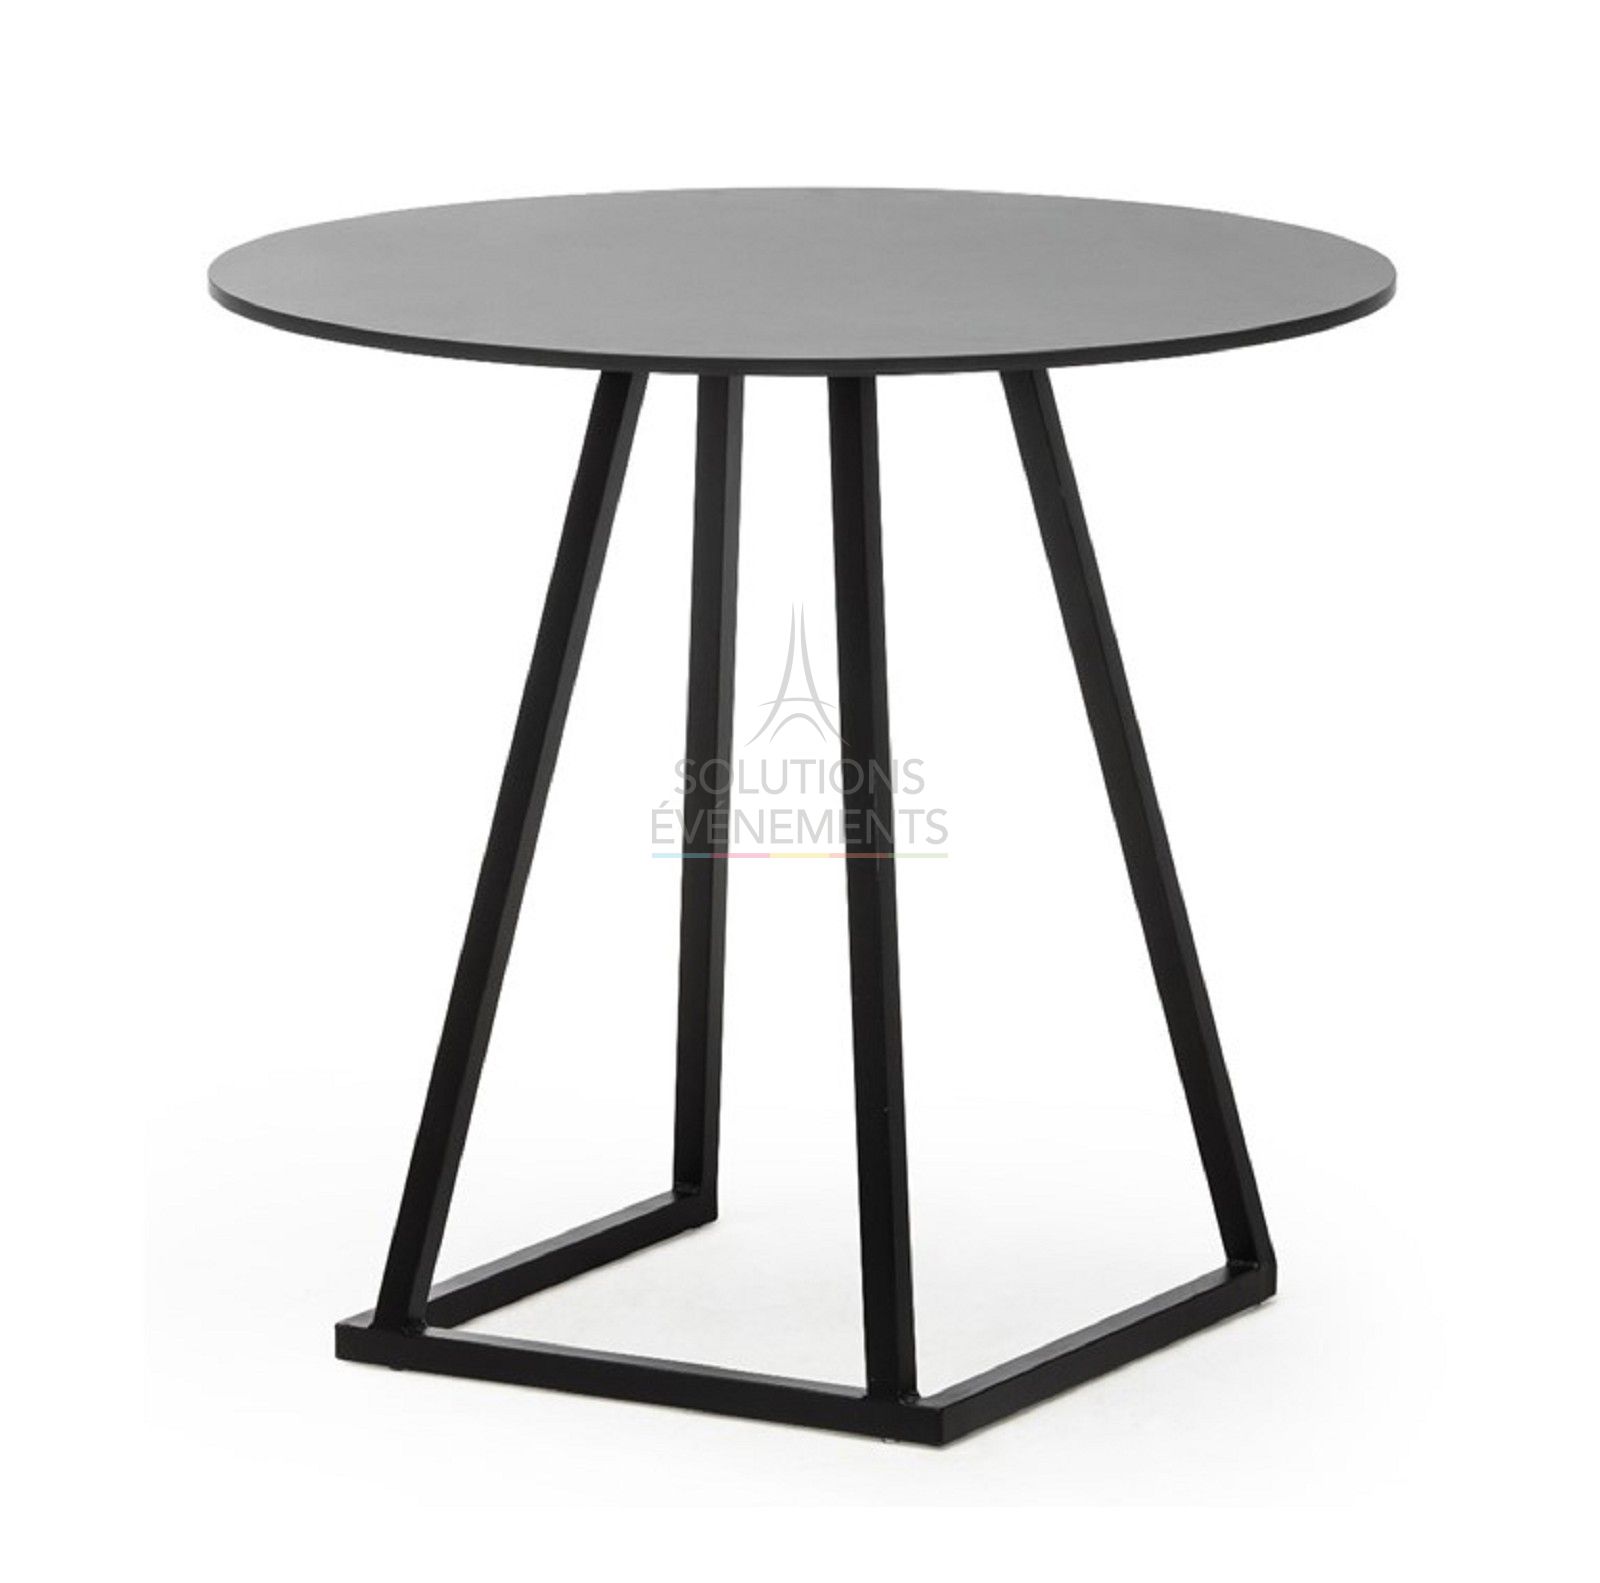 Rental of small pedestal table with round top.